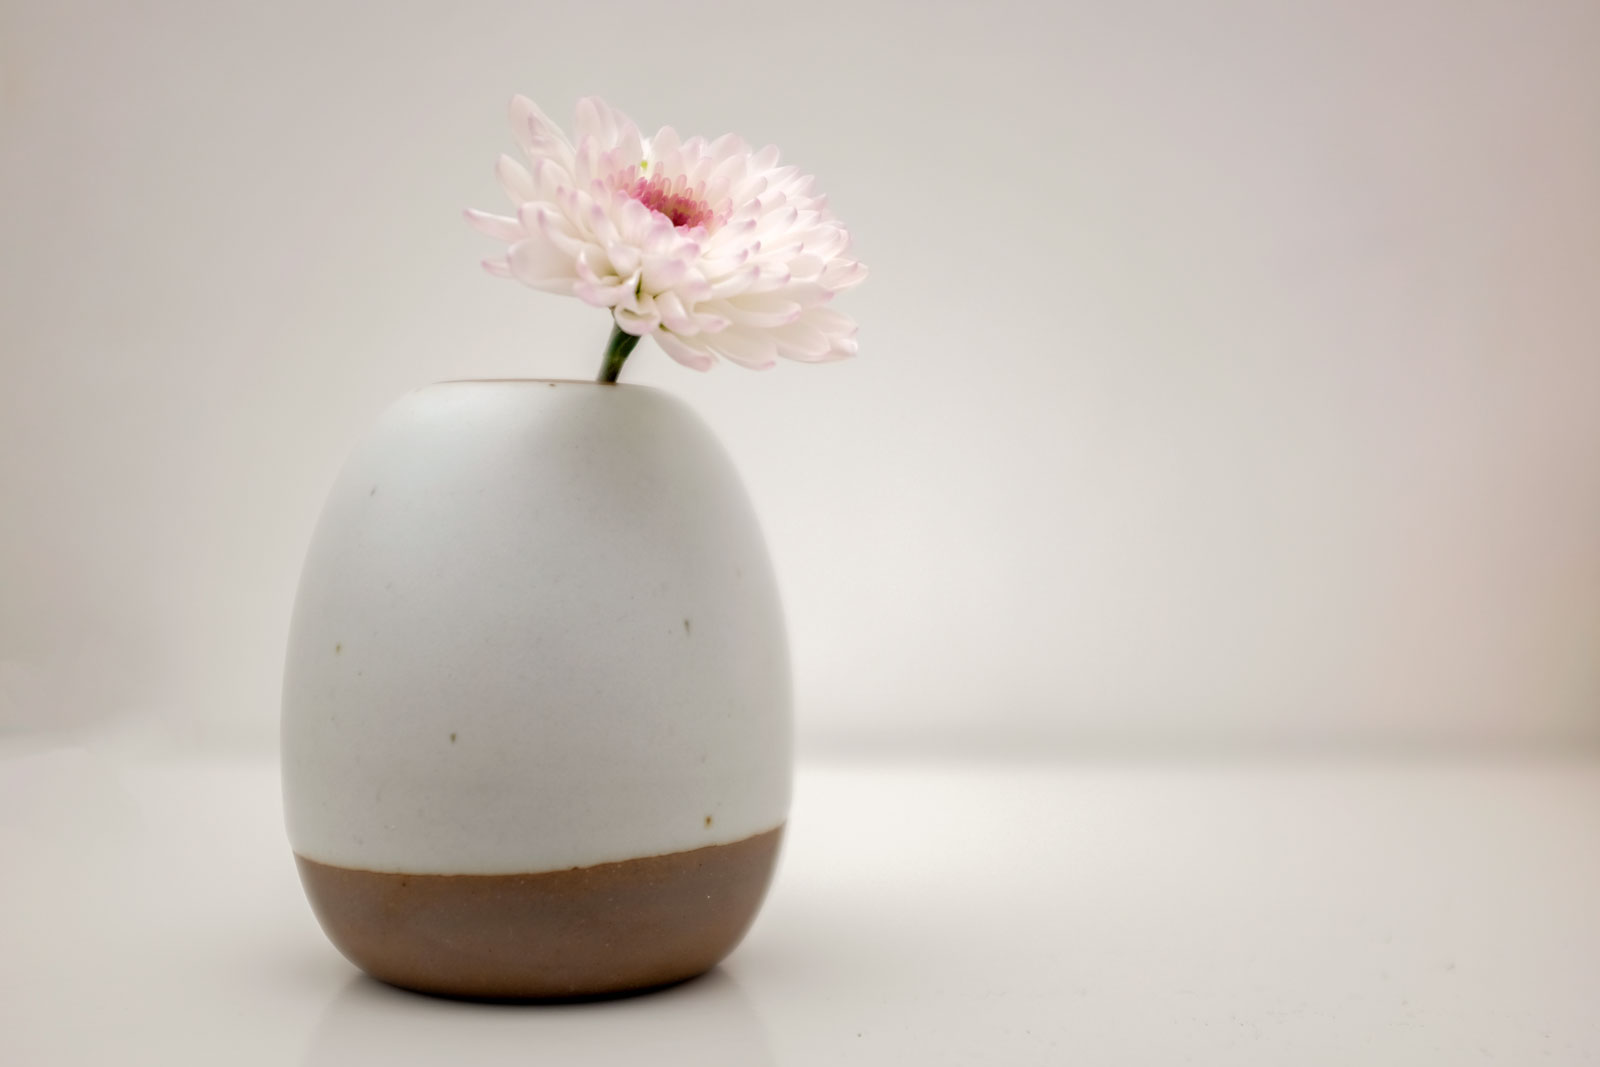 An East Fork Bud Vase with a flower